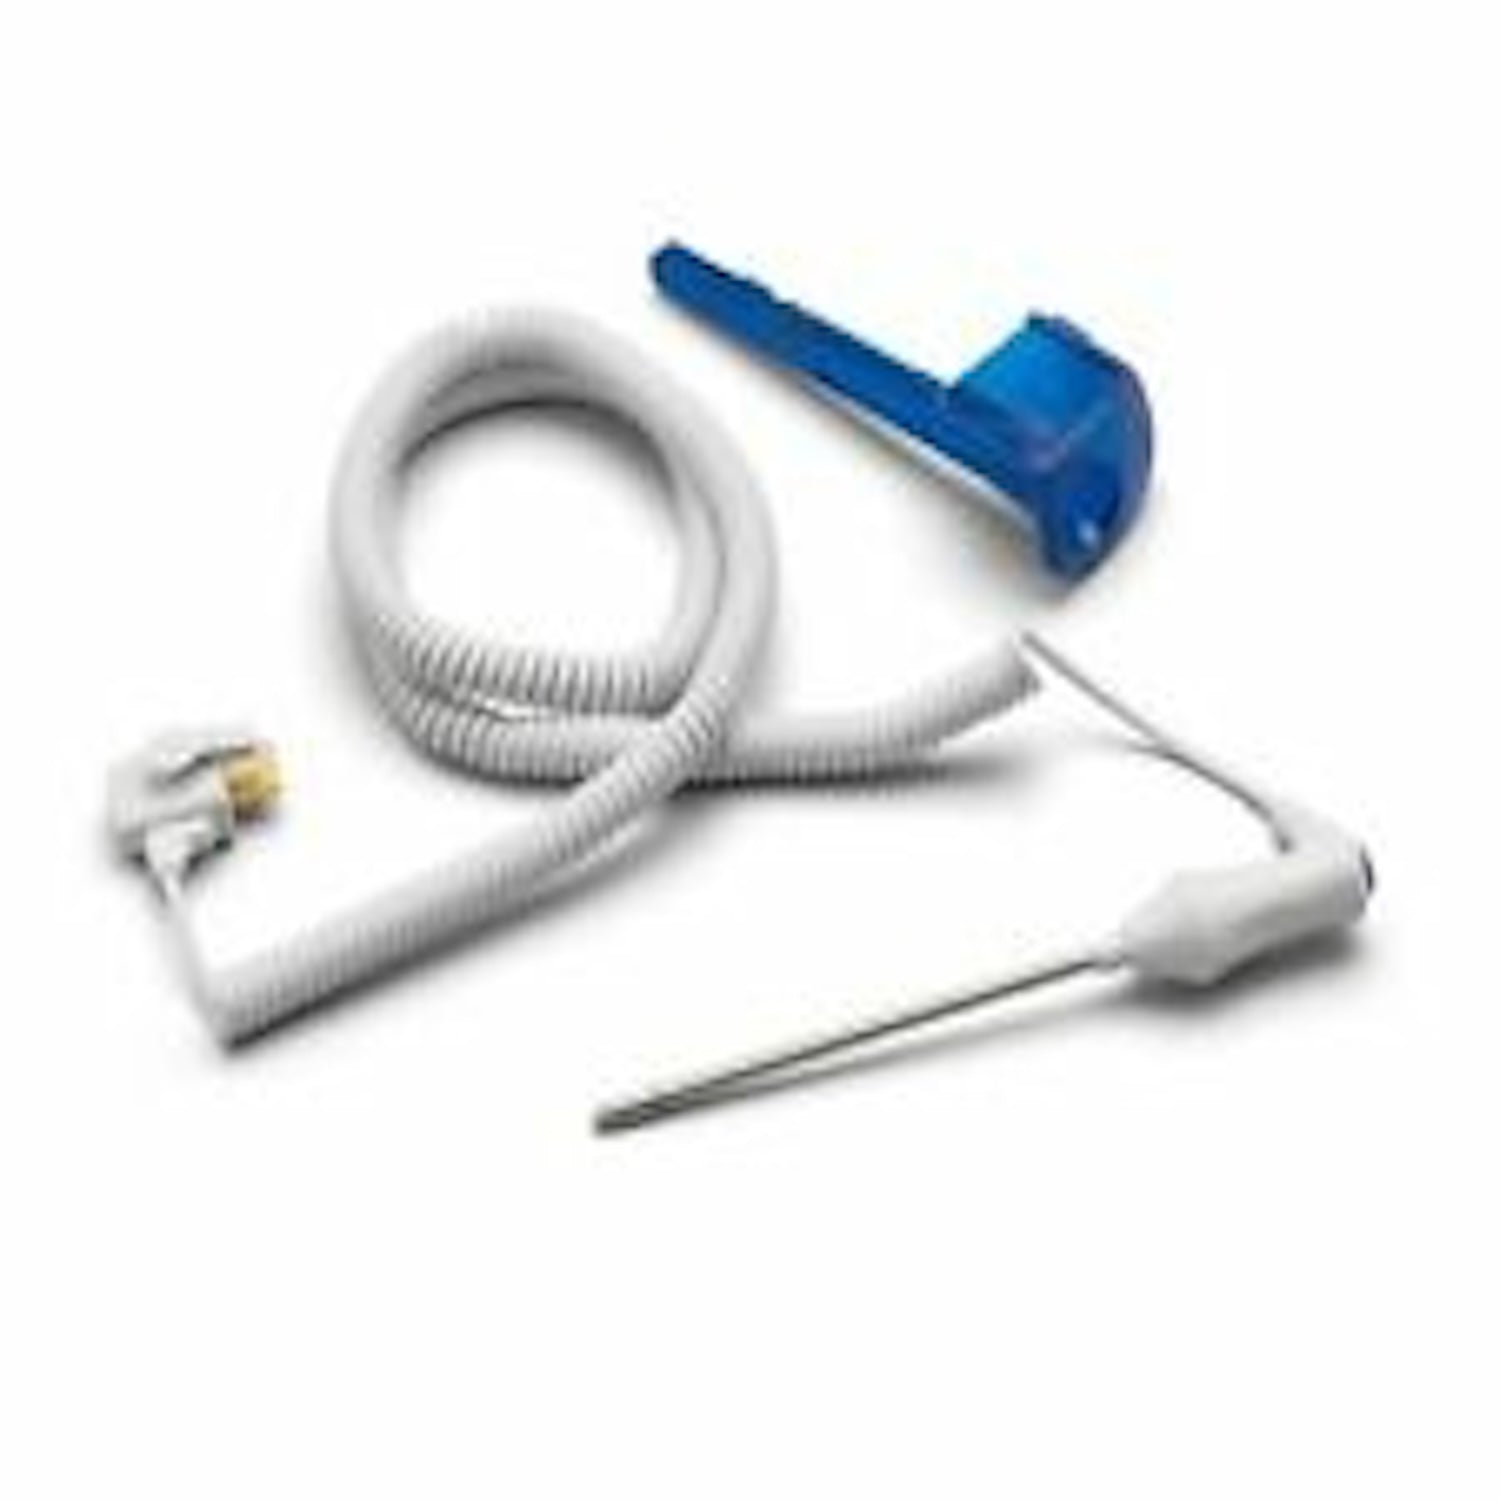 SureTemp Thermometer Probes and Well Kit - 4ft